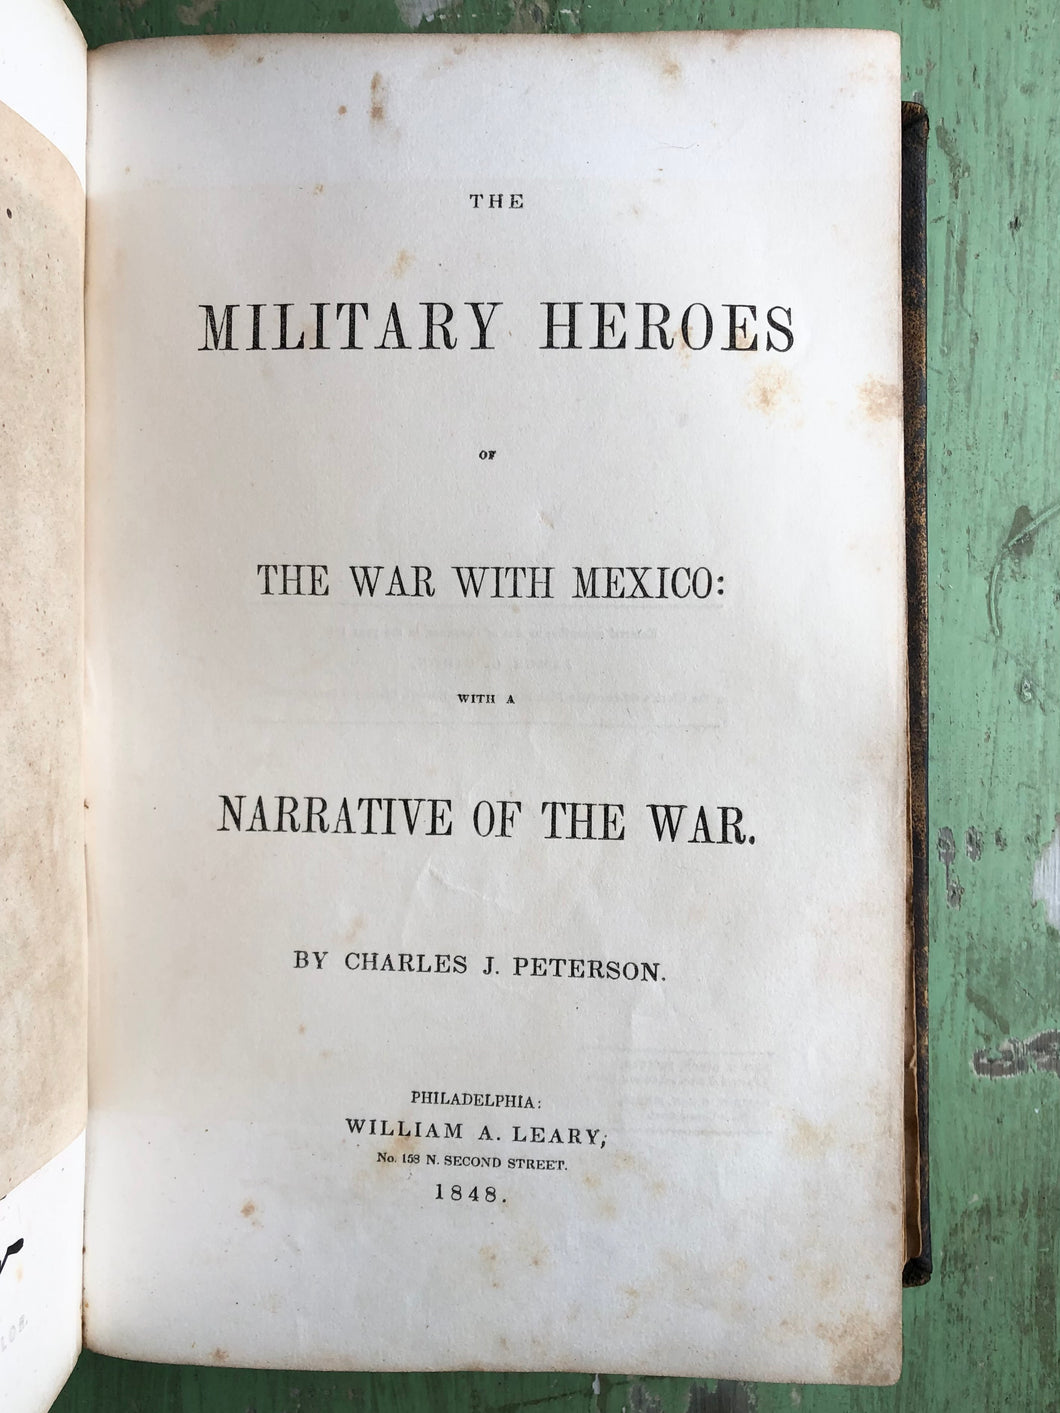 “The Military Heroes of the War of 1812: with a Narrative of the War” with “The Military Heroes of the War with Mexico: with a Narrative of the War” by Charles J. Peterson